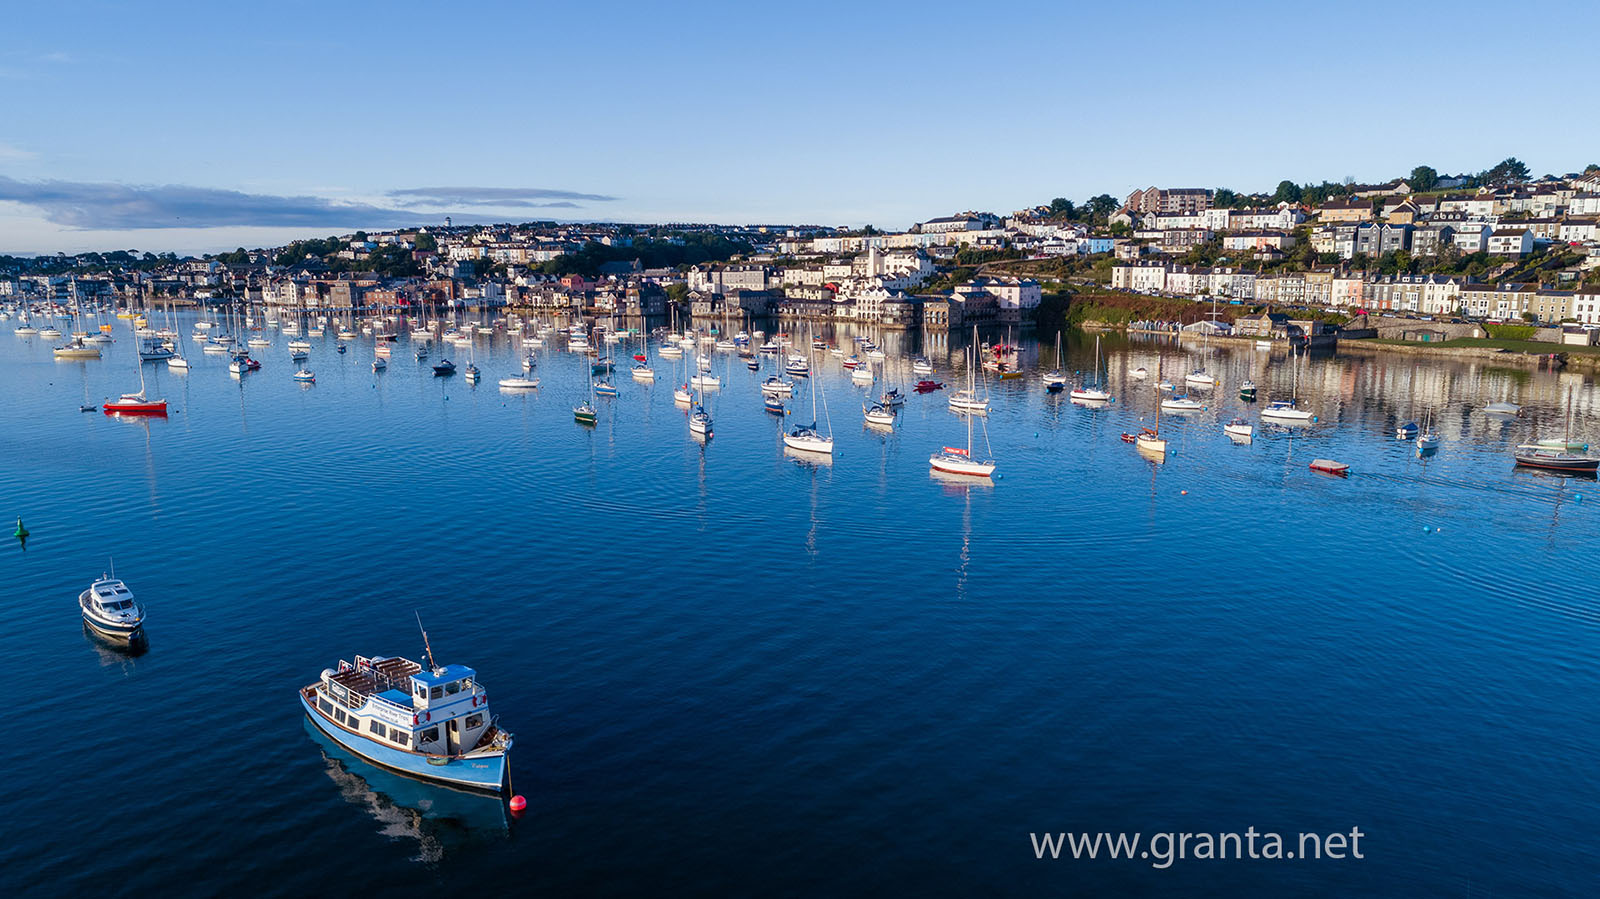 Boats moored up in Falmouth harbour at dawn, summer 2018